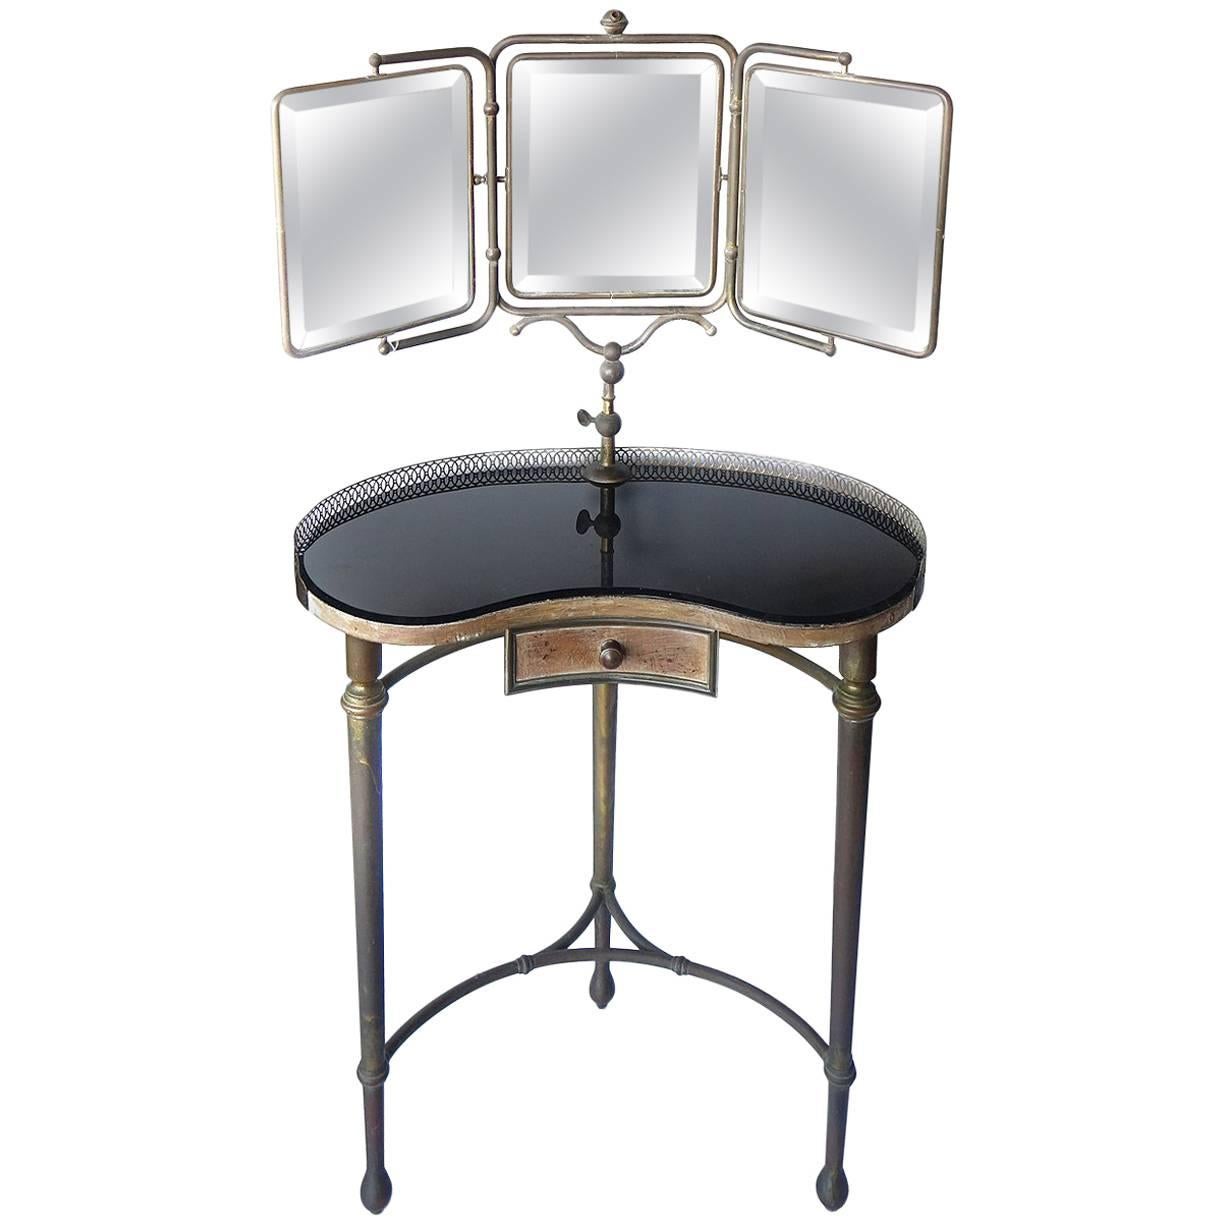 French Art Deco Articulated Mirror Vanity